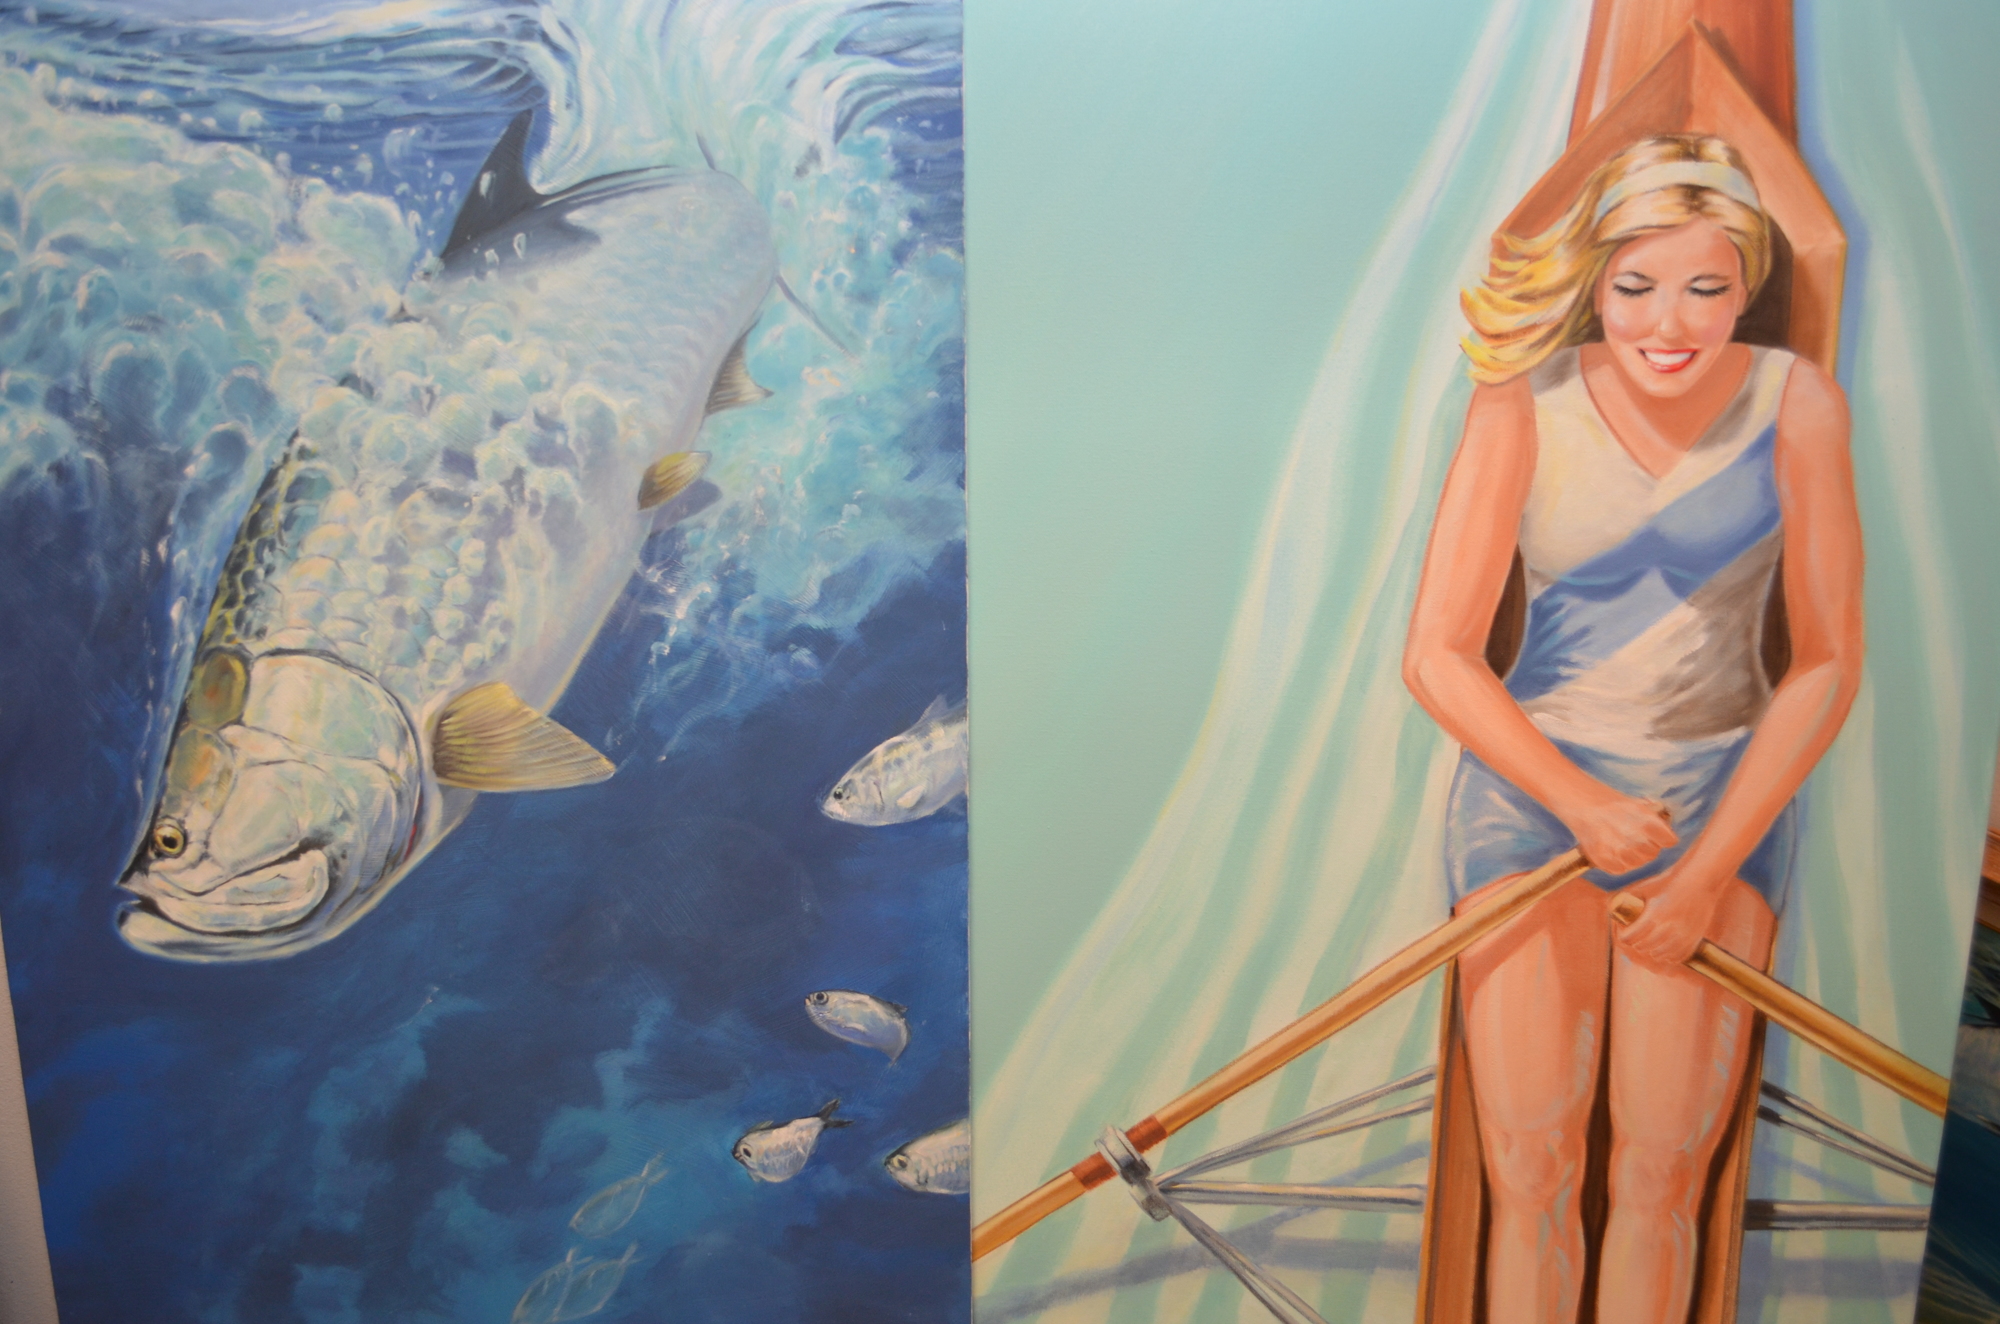 Coudal paints in two distinct arenas: Florida wildlife and retro illustration